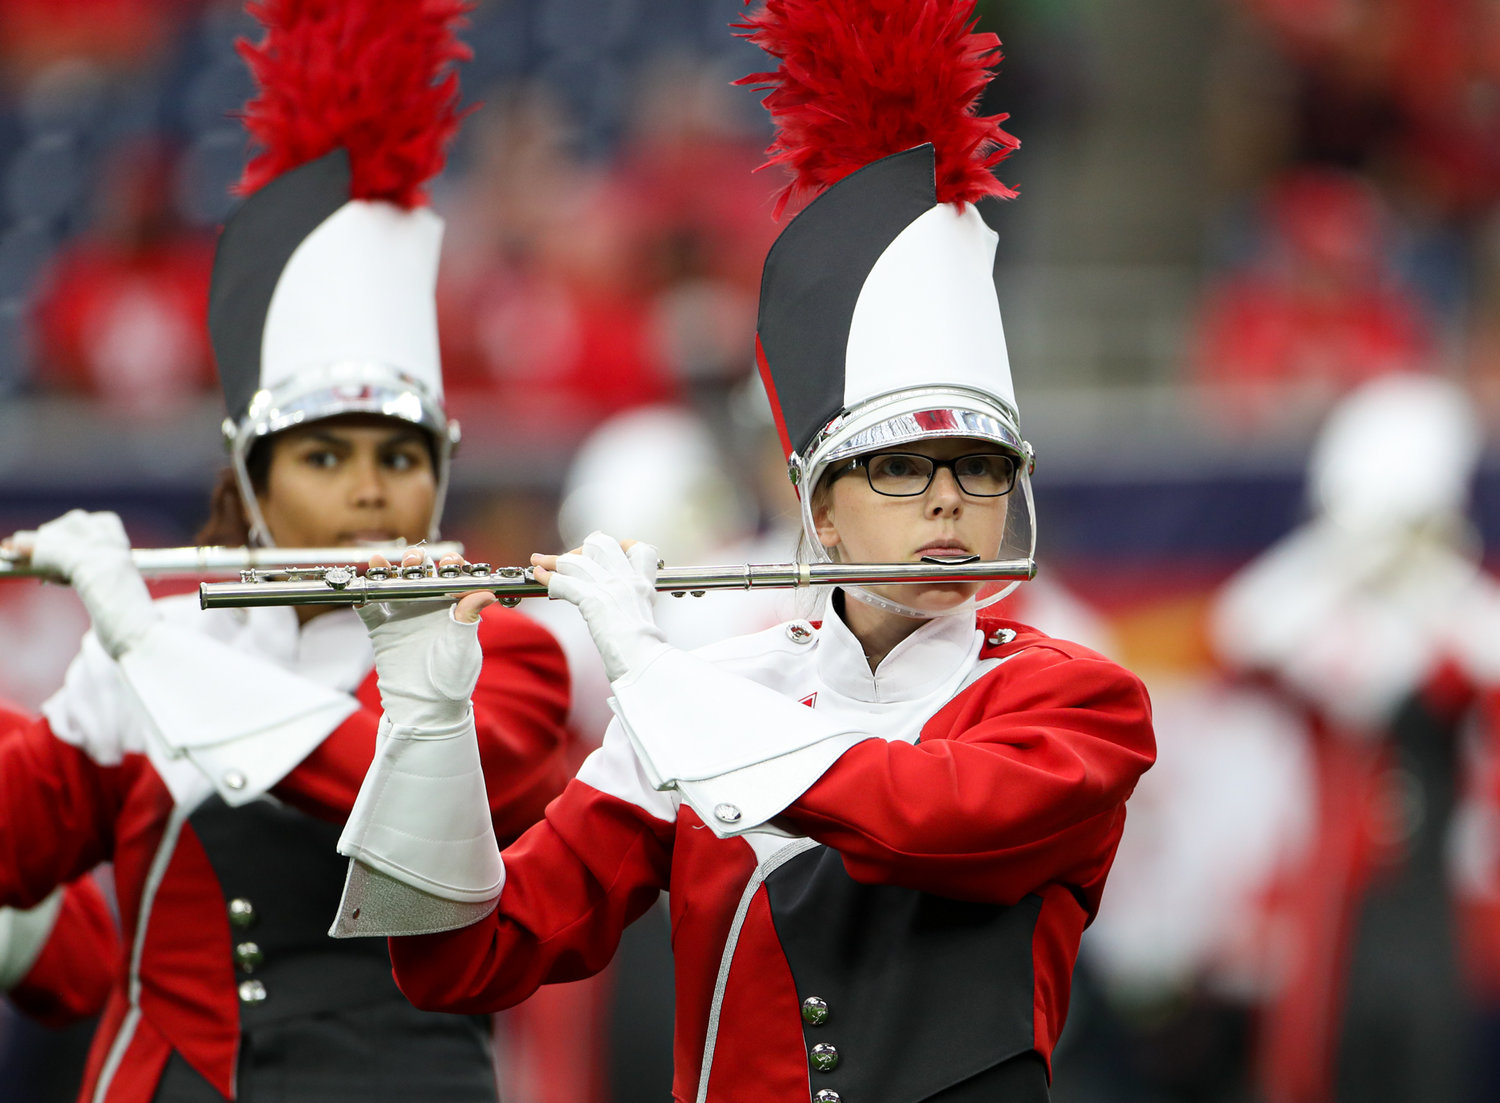 The Houston Cougars band performs before an NCAA football game between Houston and Texas Tech on September 4, 2021 in Houston, Texas.